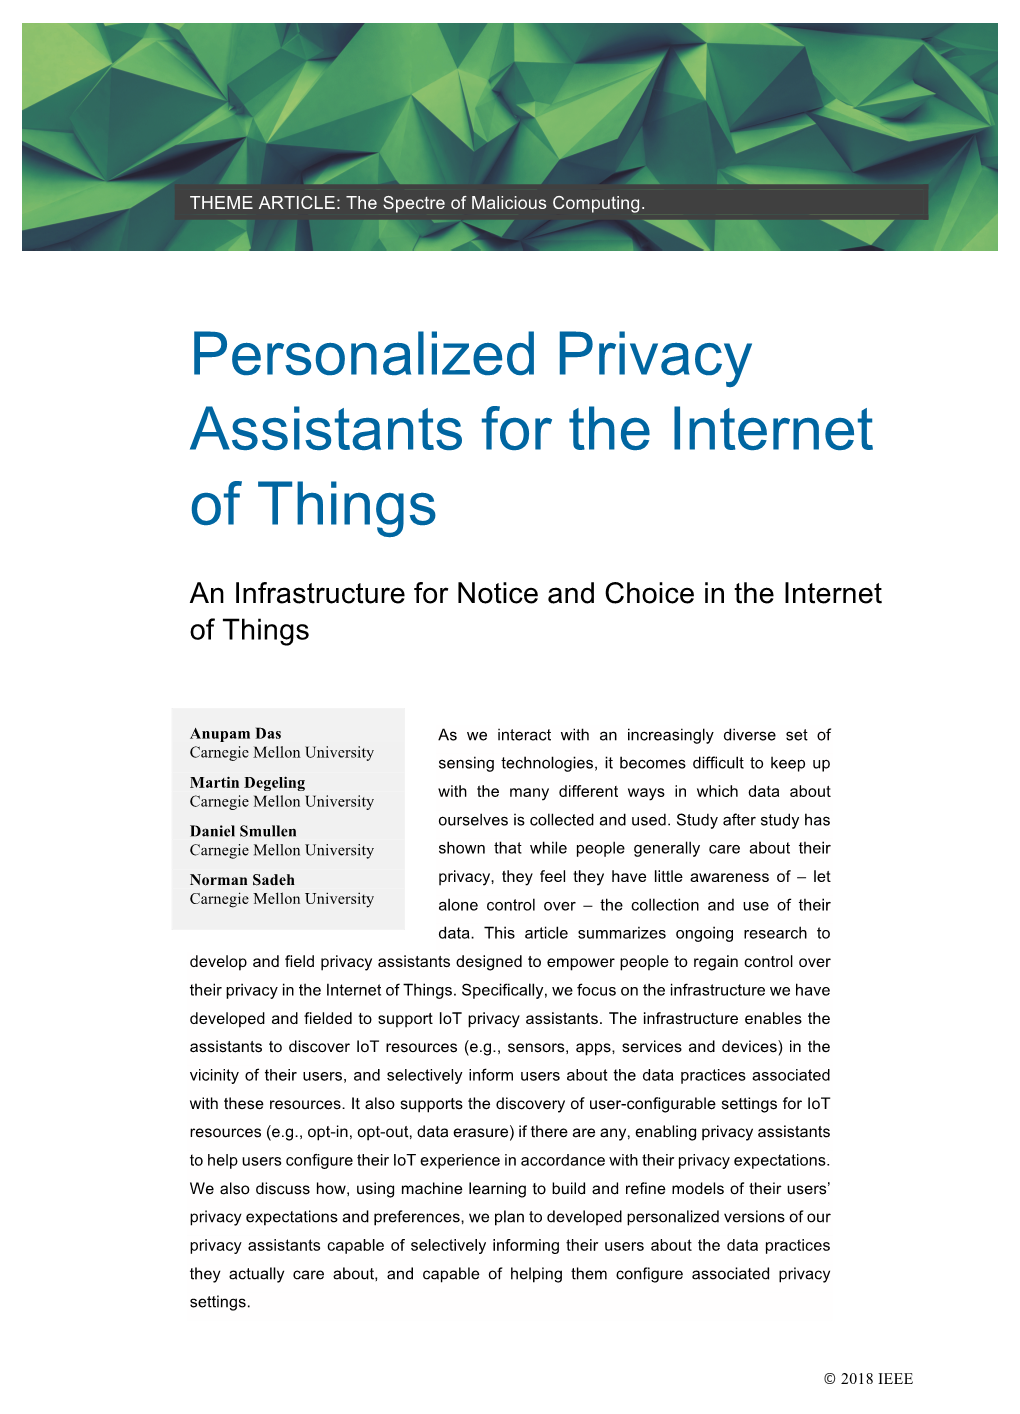 Personalized Privacy Assistants for the Internet of Things